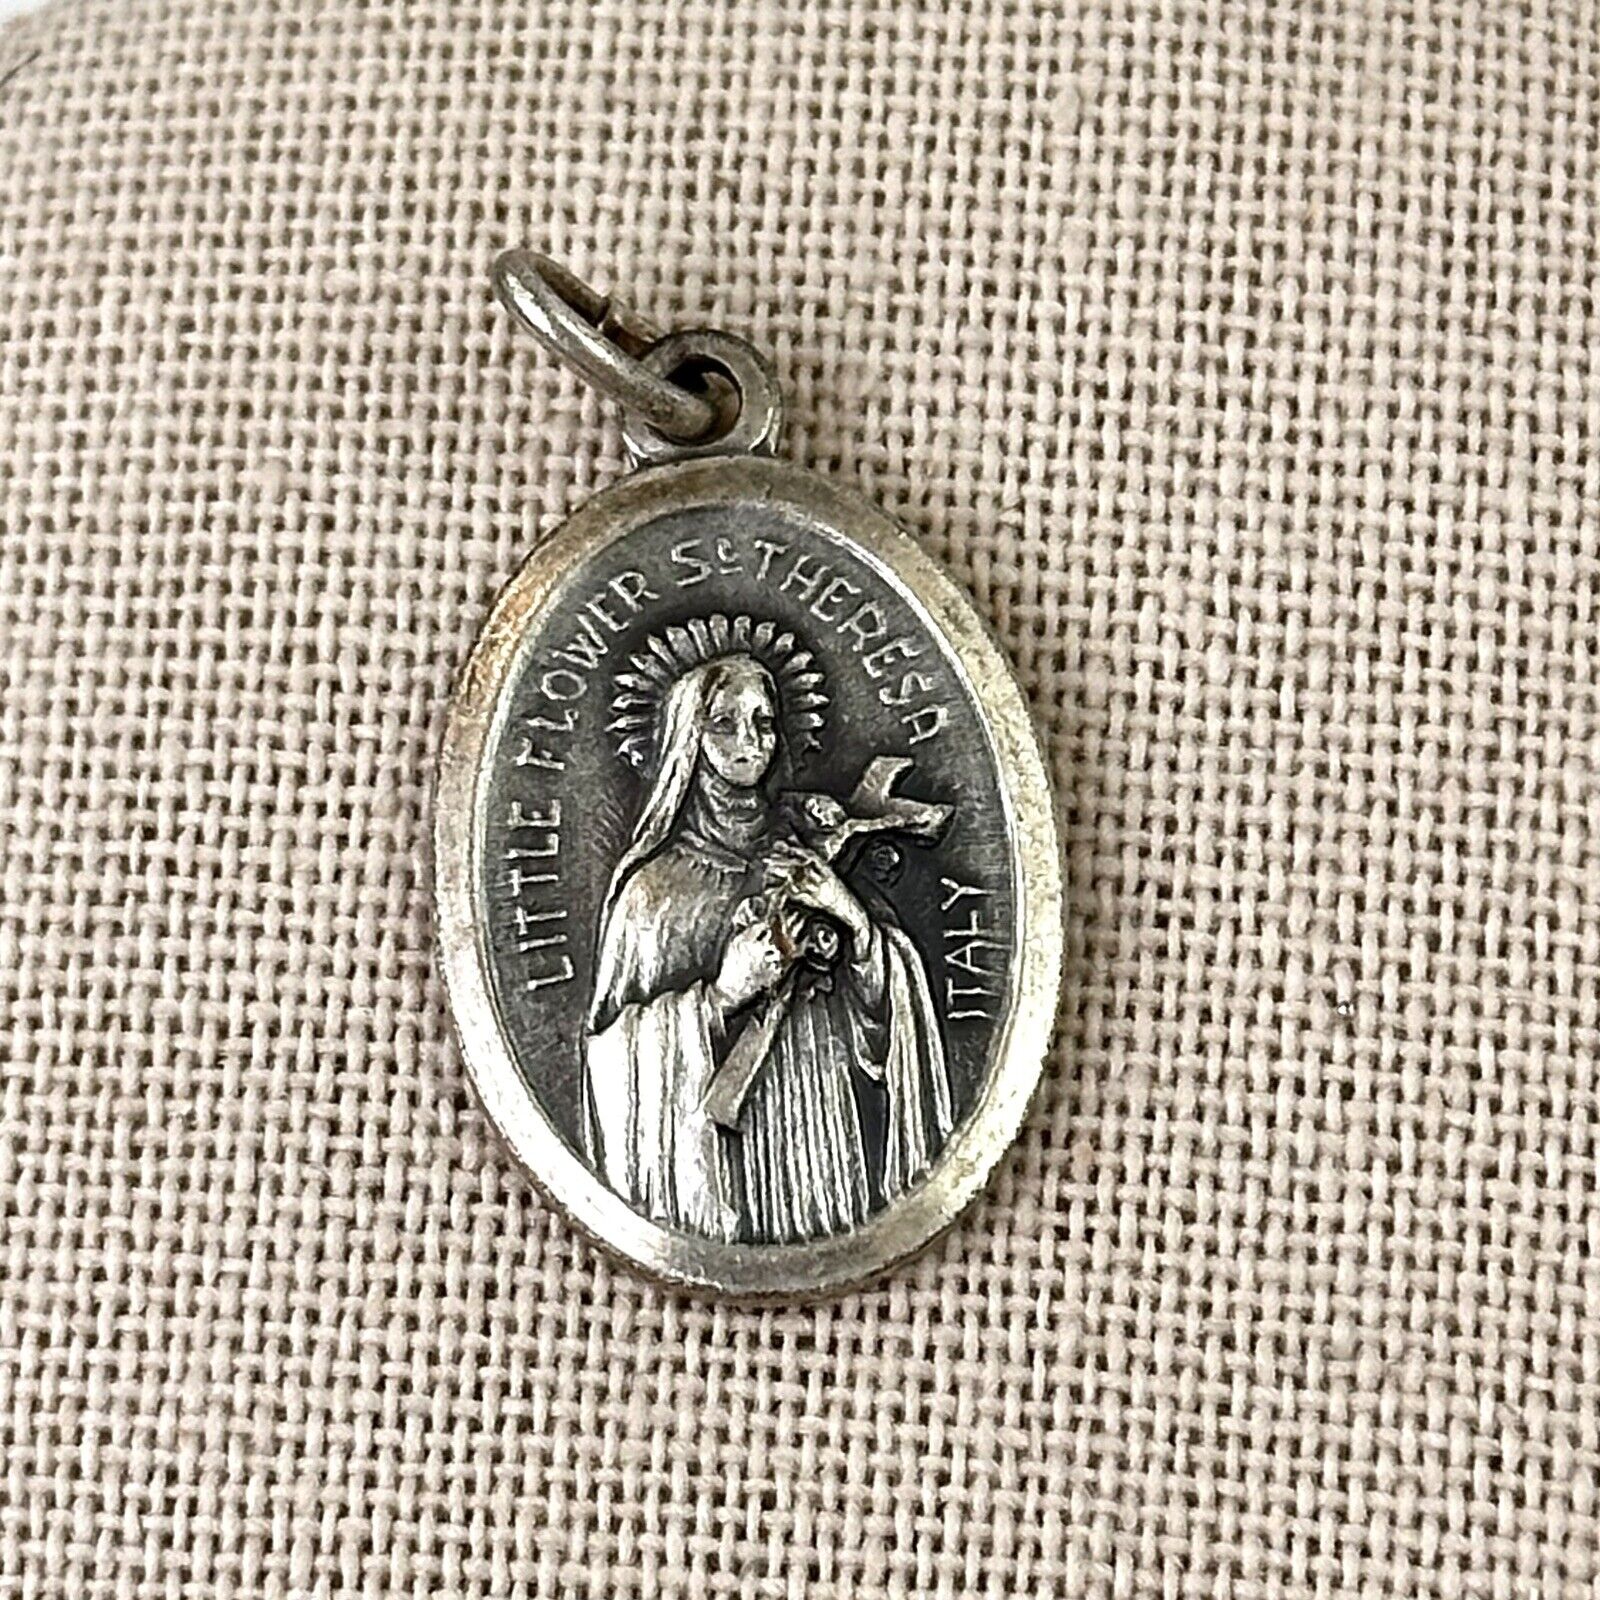 Vintage Catholic Little Flower Saint Therese Religious Medal Marked ITALY